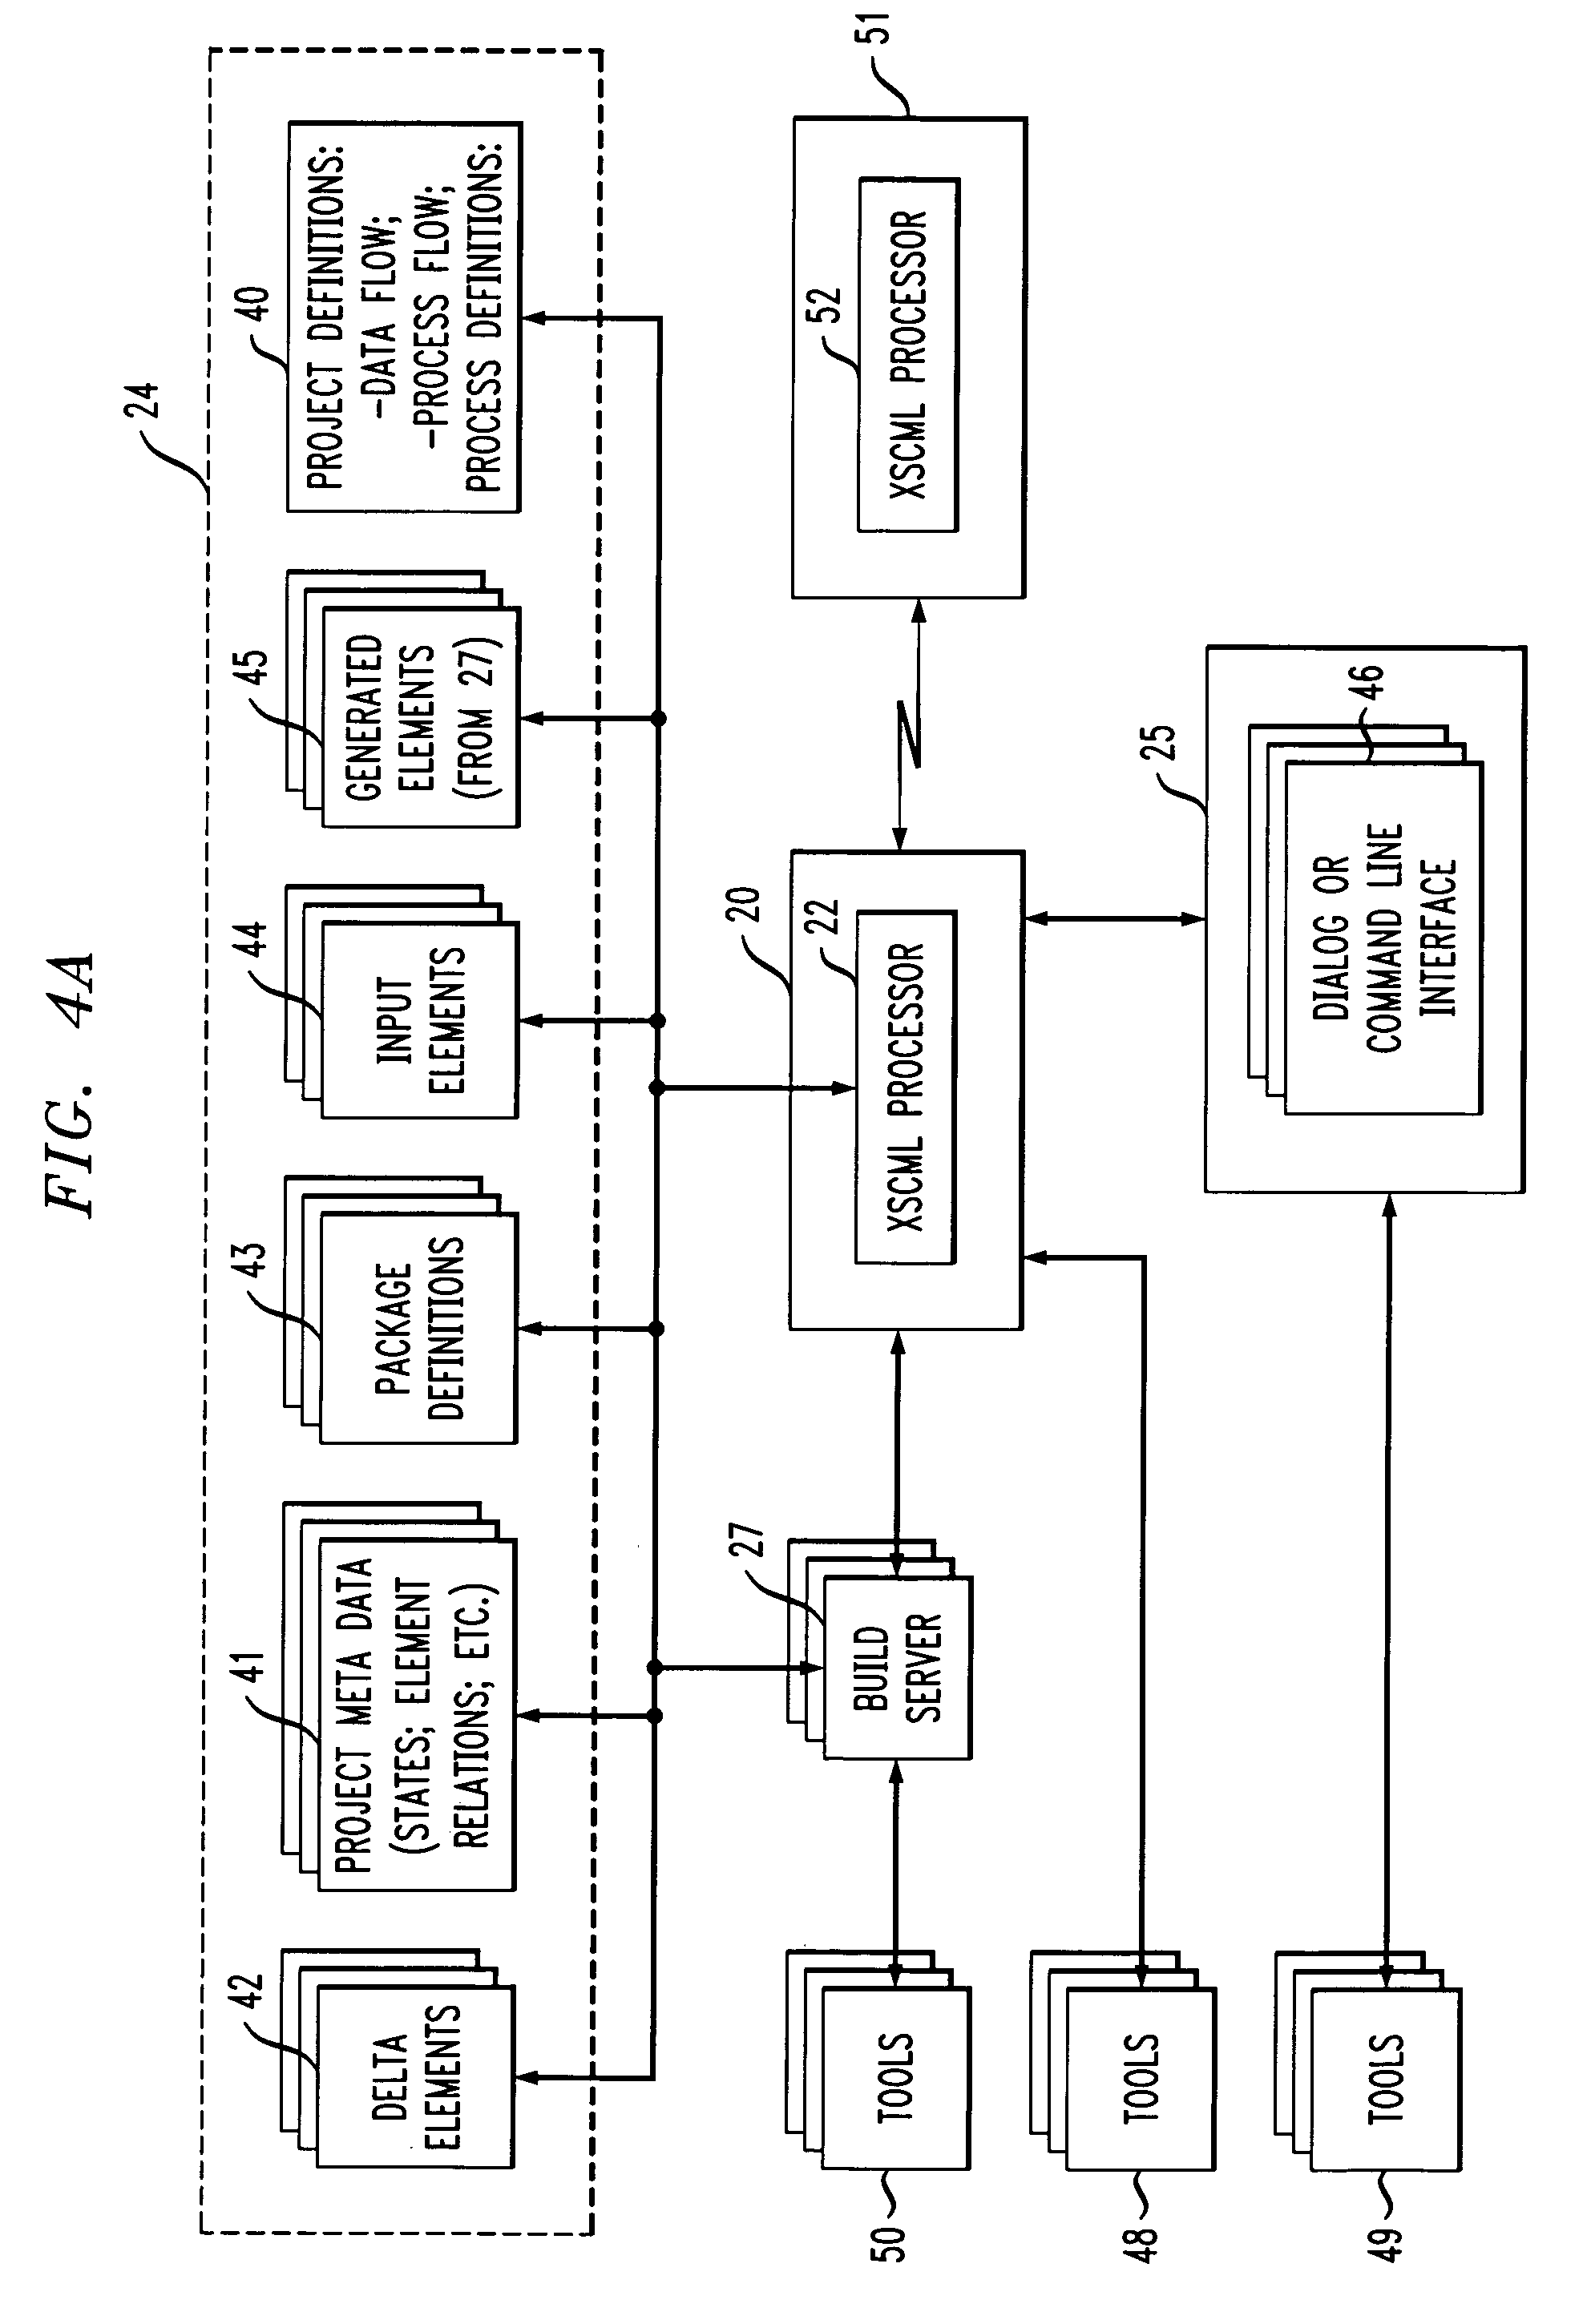 System and method for the configuration of software products